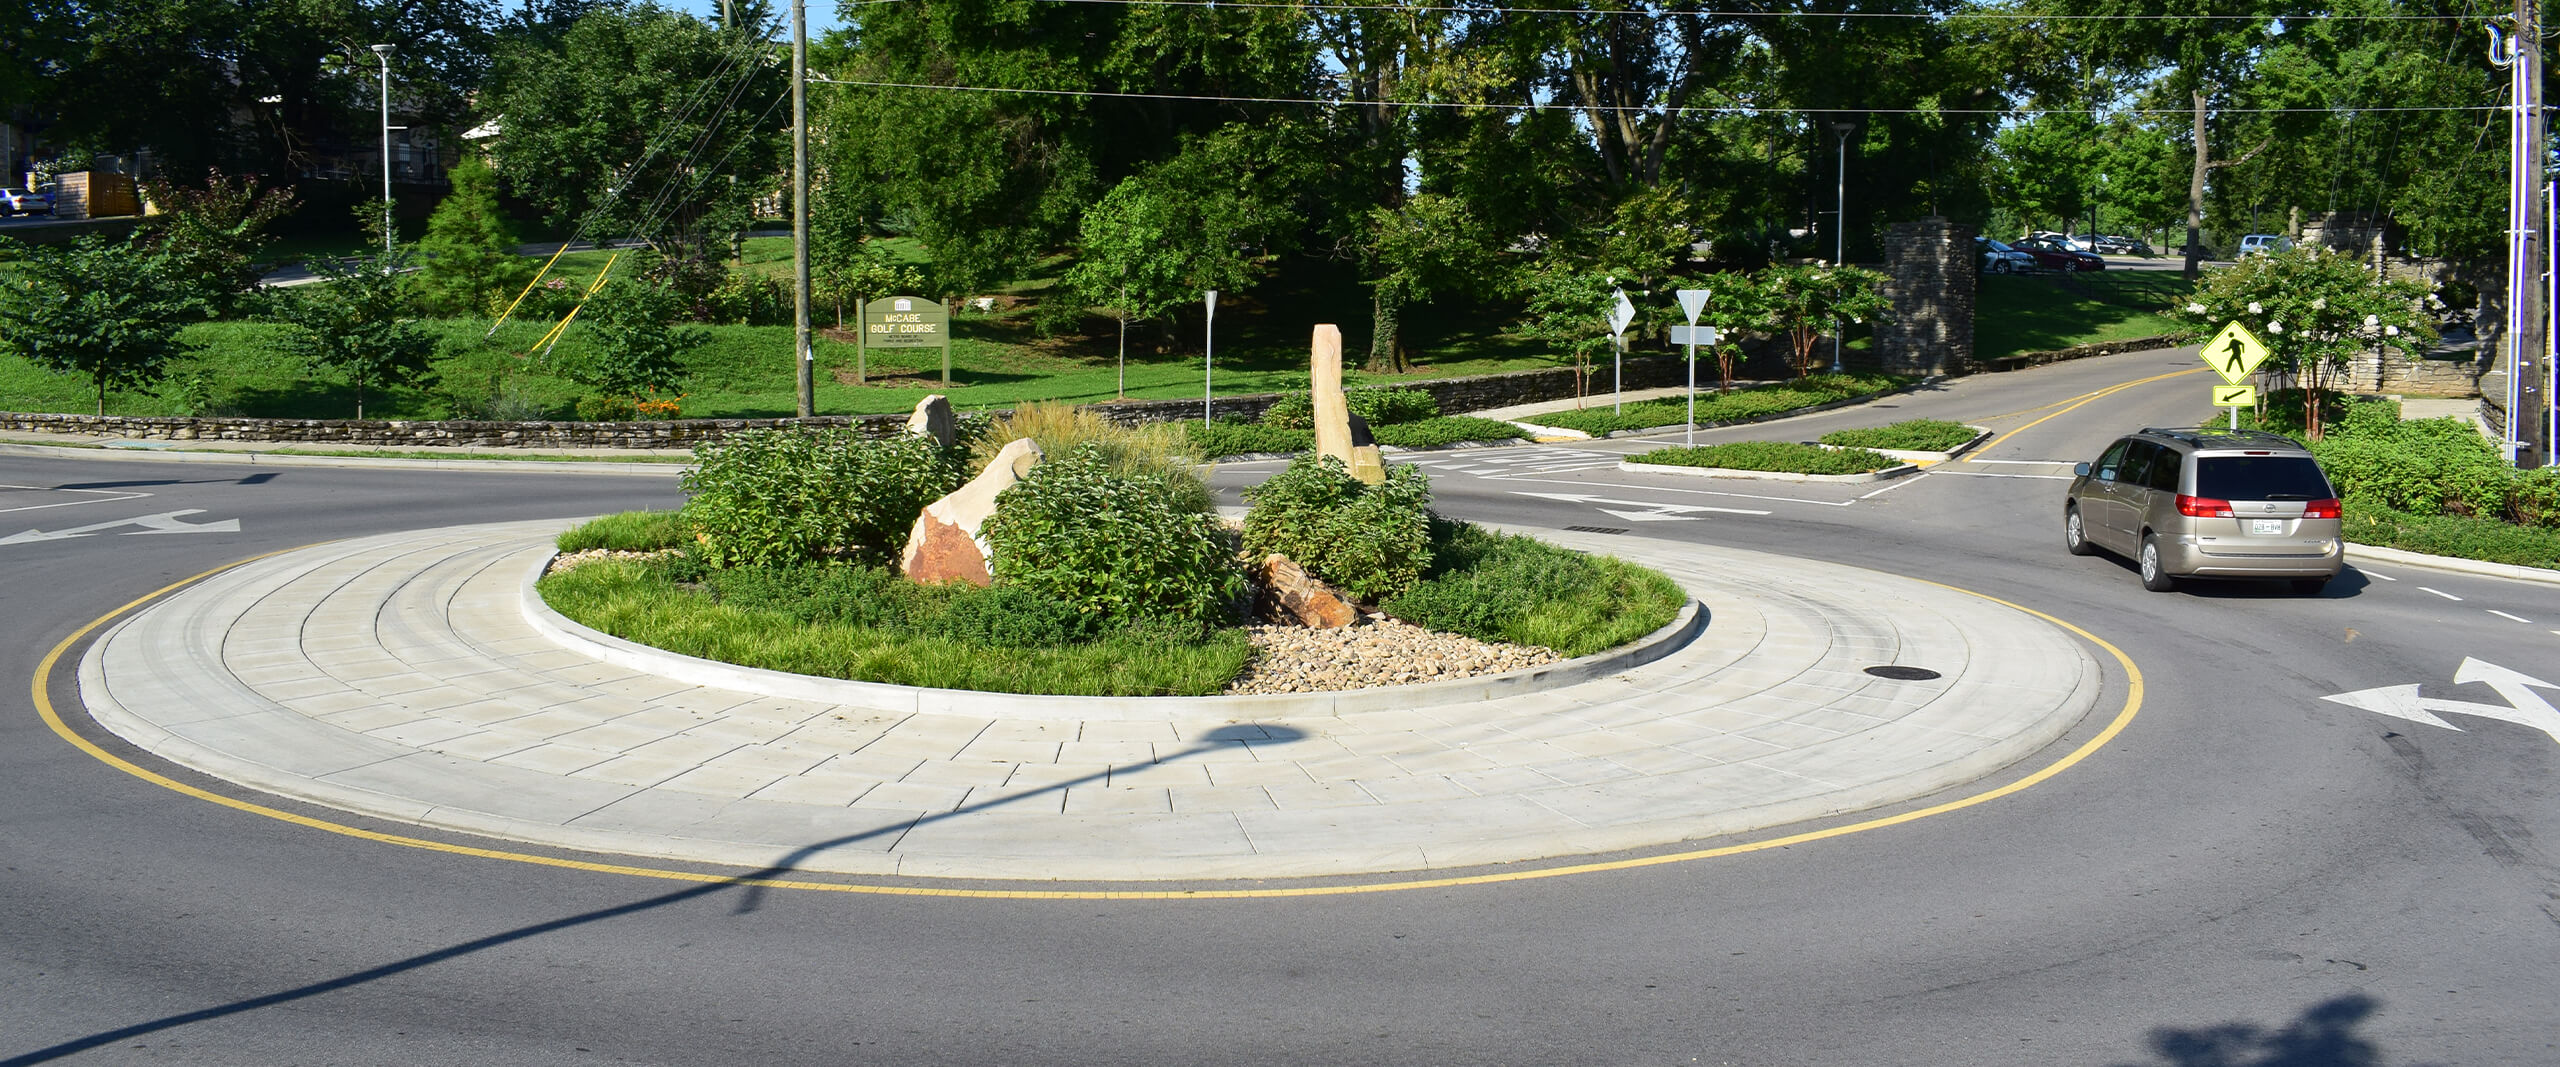 The 46th and Murphy Road roundabout